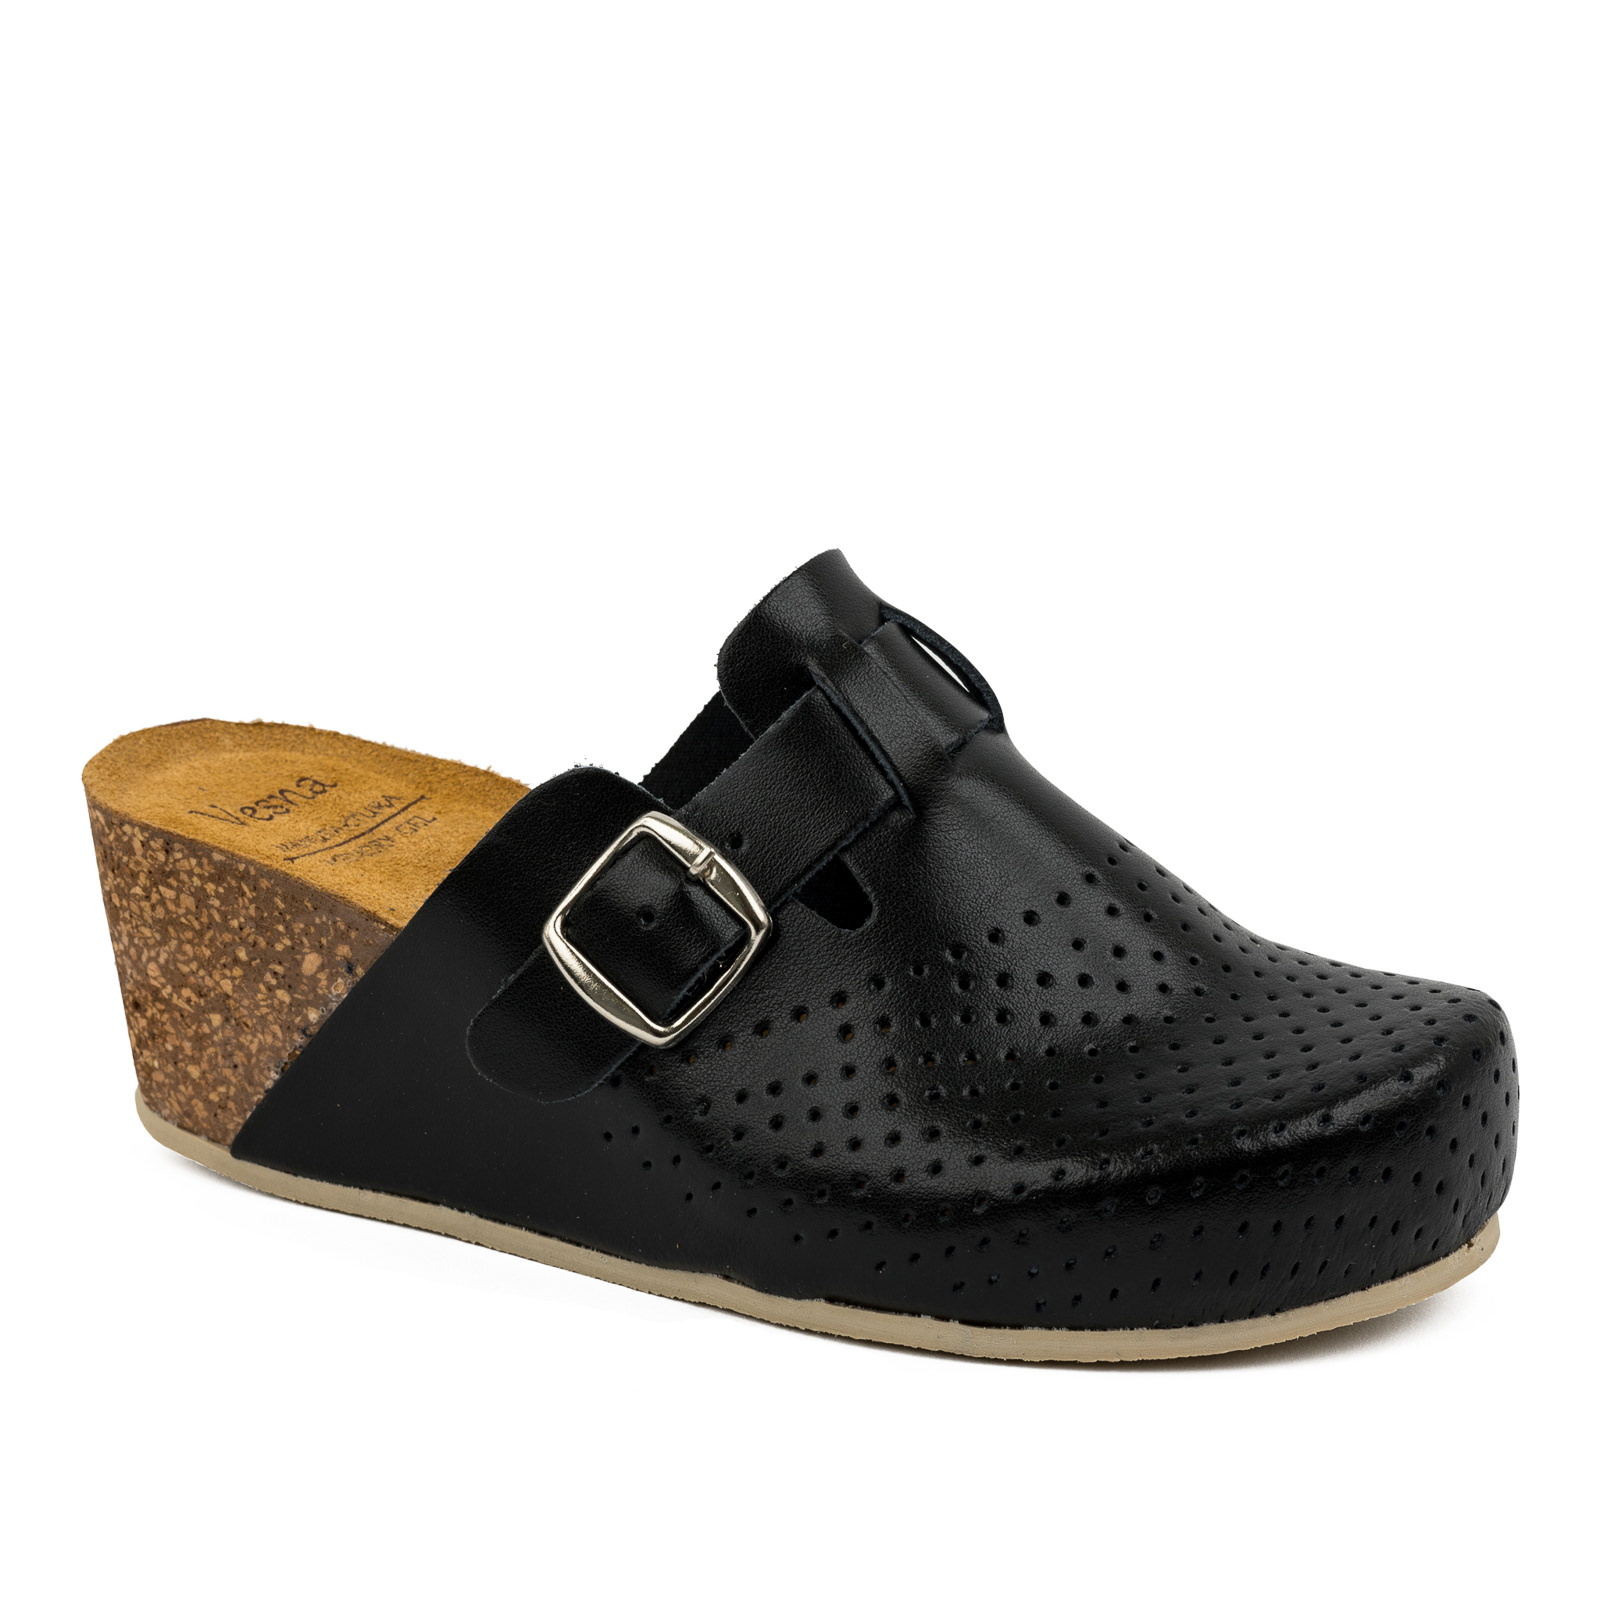 ANATOMIC LEATHER CLOGS WITH BELT AND HIGH SOLE  - BLACK